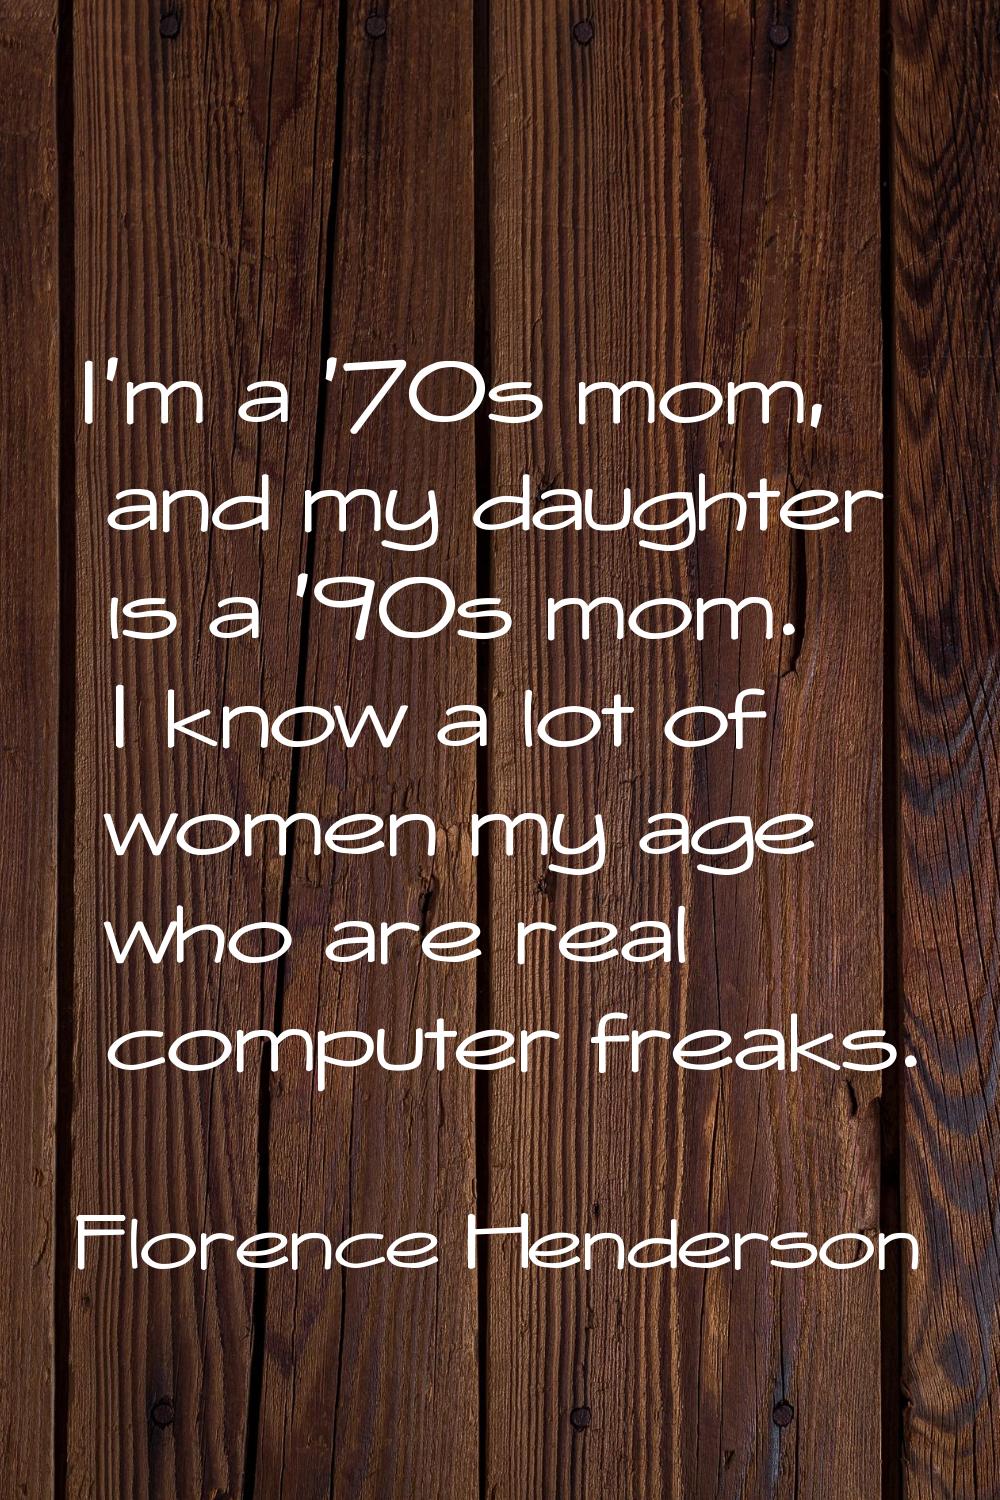 I'm a '70s mom, and my daughter is a '90s mom. I know a lot of women my age who are real computer f